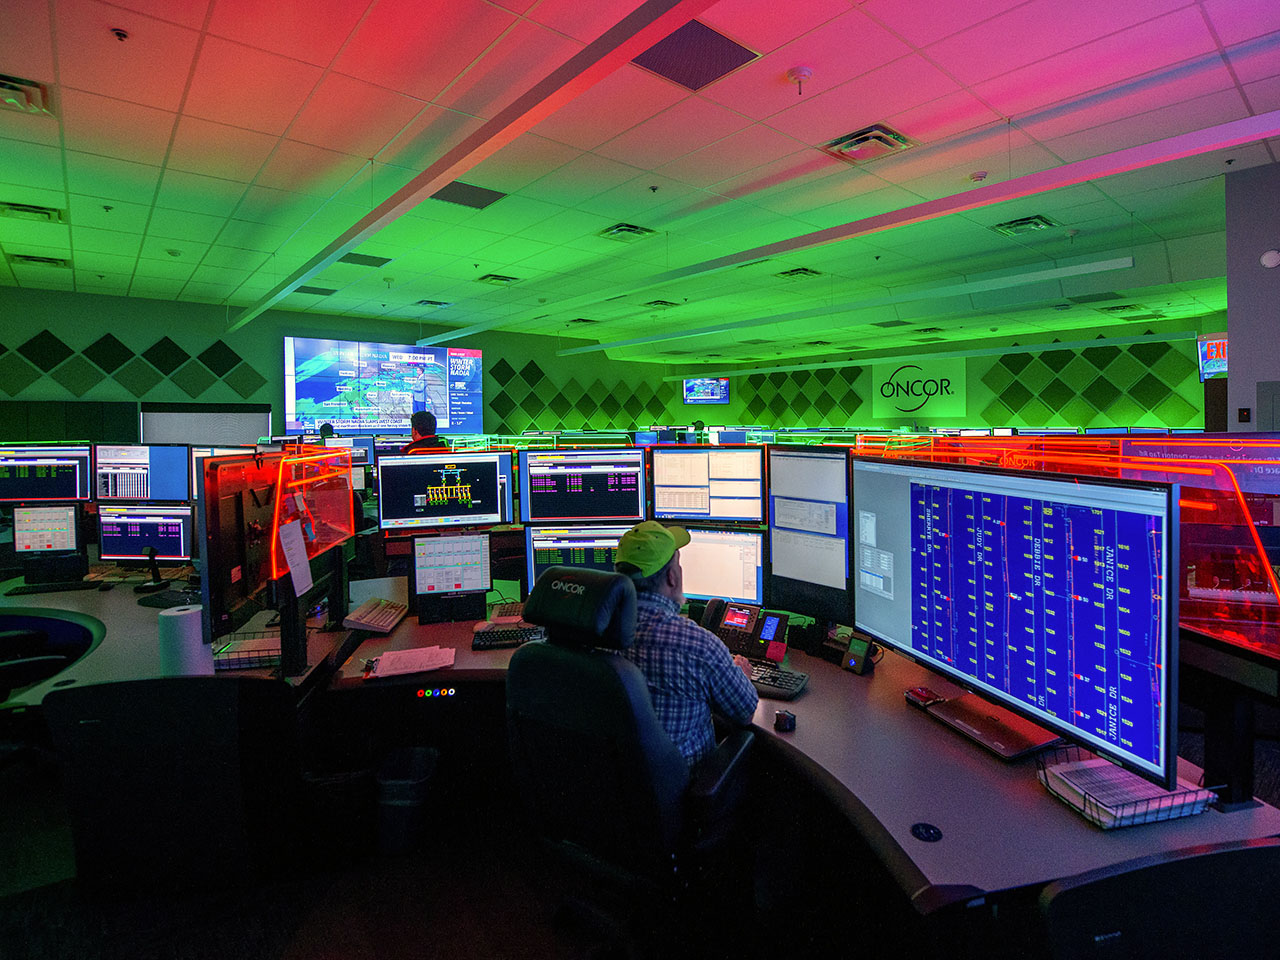 From its state-of-the-art control room, Oncor monitors the smart grid that delivers power to 10 million Texans.